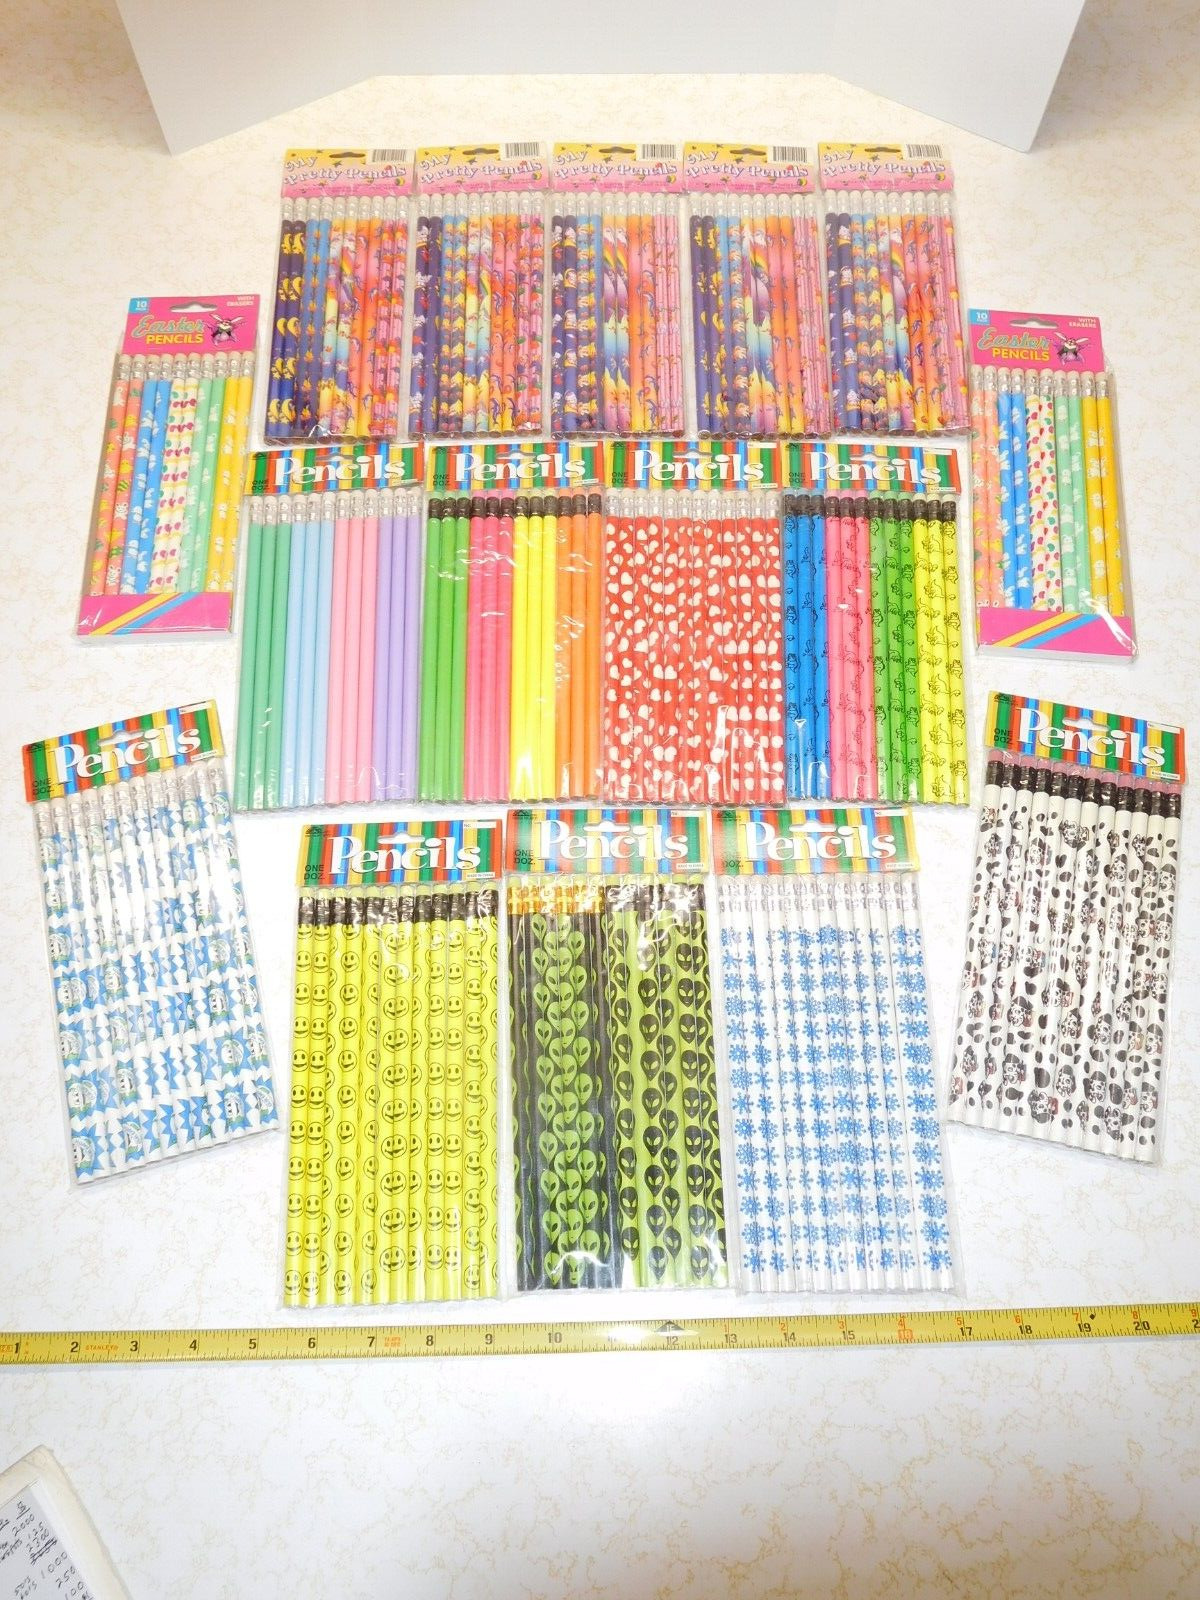 16 Packs/178 New Colorful Pencils Alien, Smiley Face, Dinosaurs